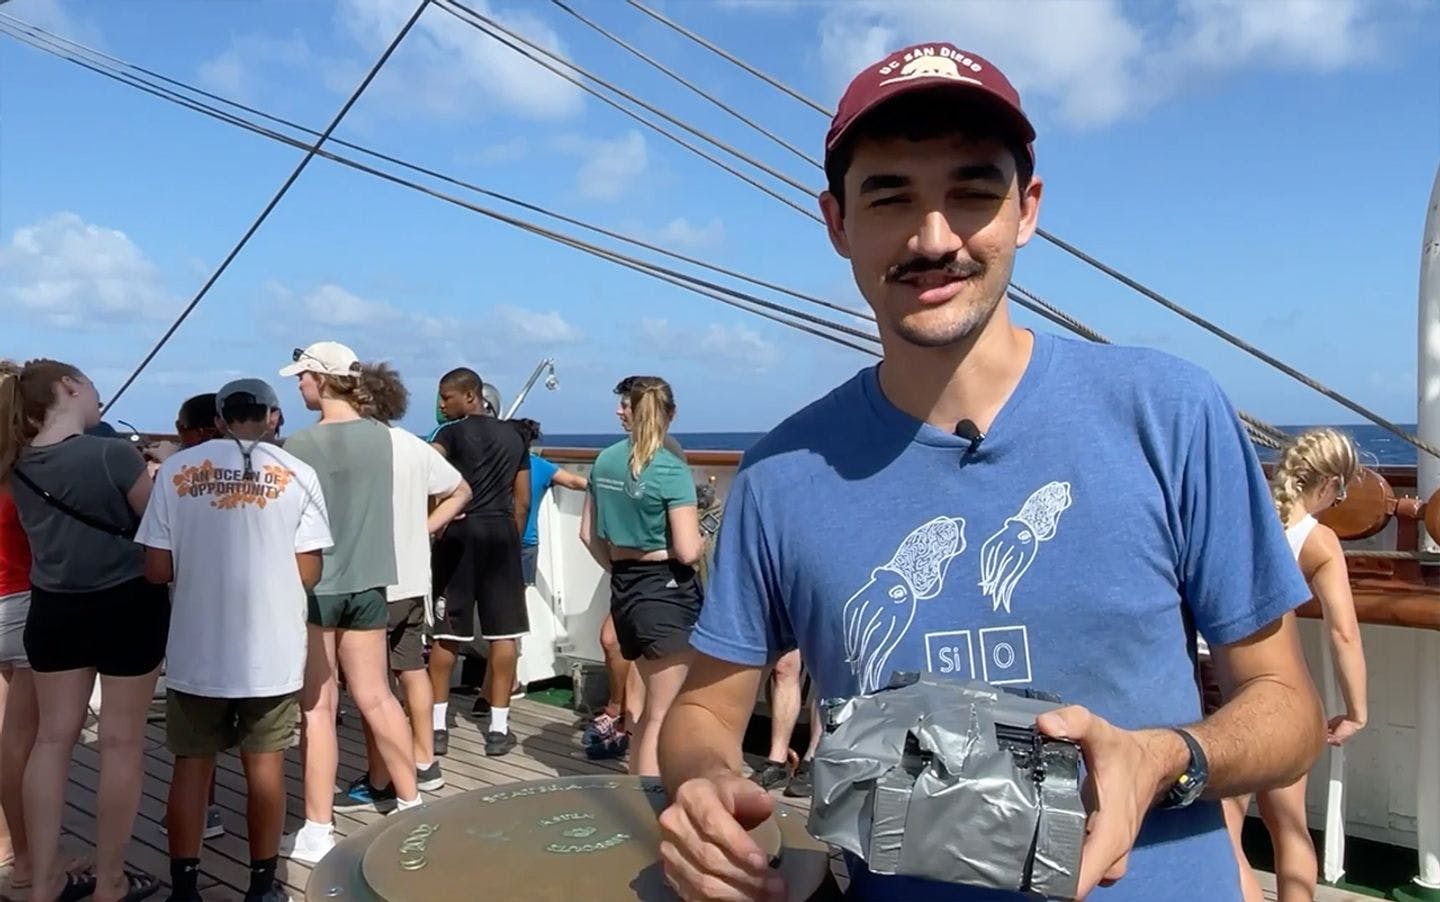 Bobby Sanchez, student at UC San Diego, is ready to launch the home-made floater